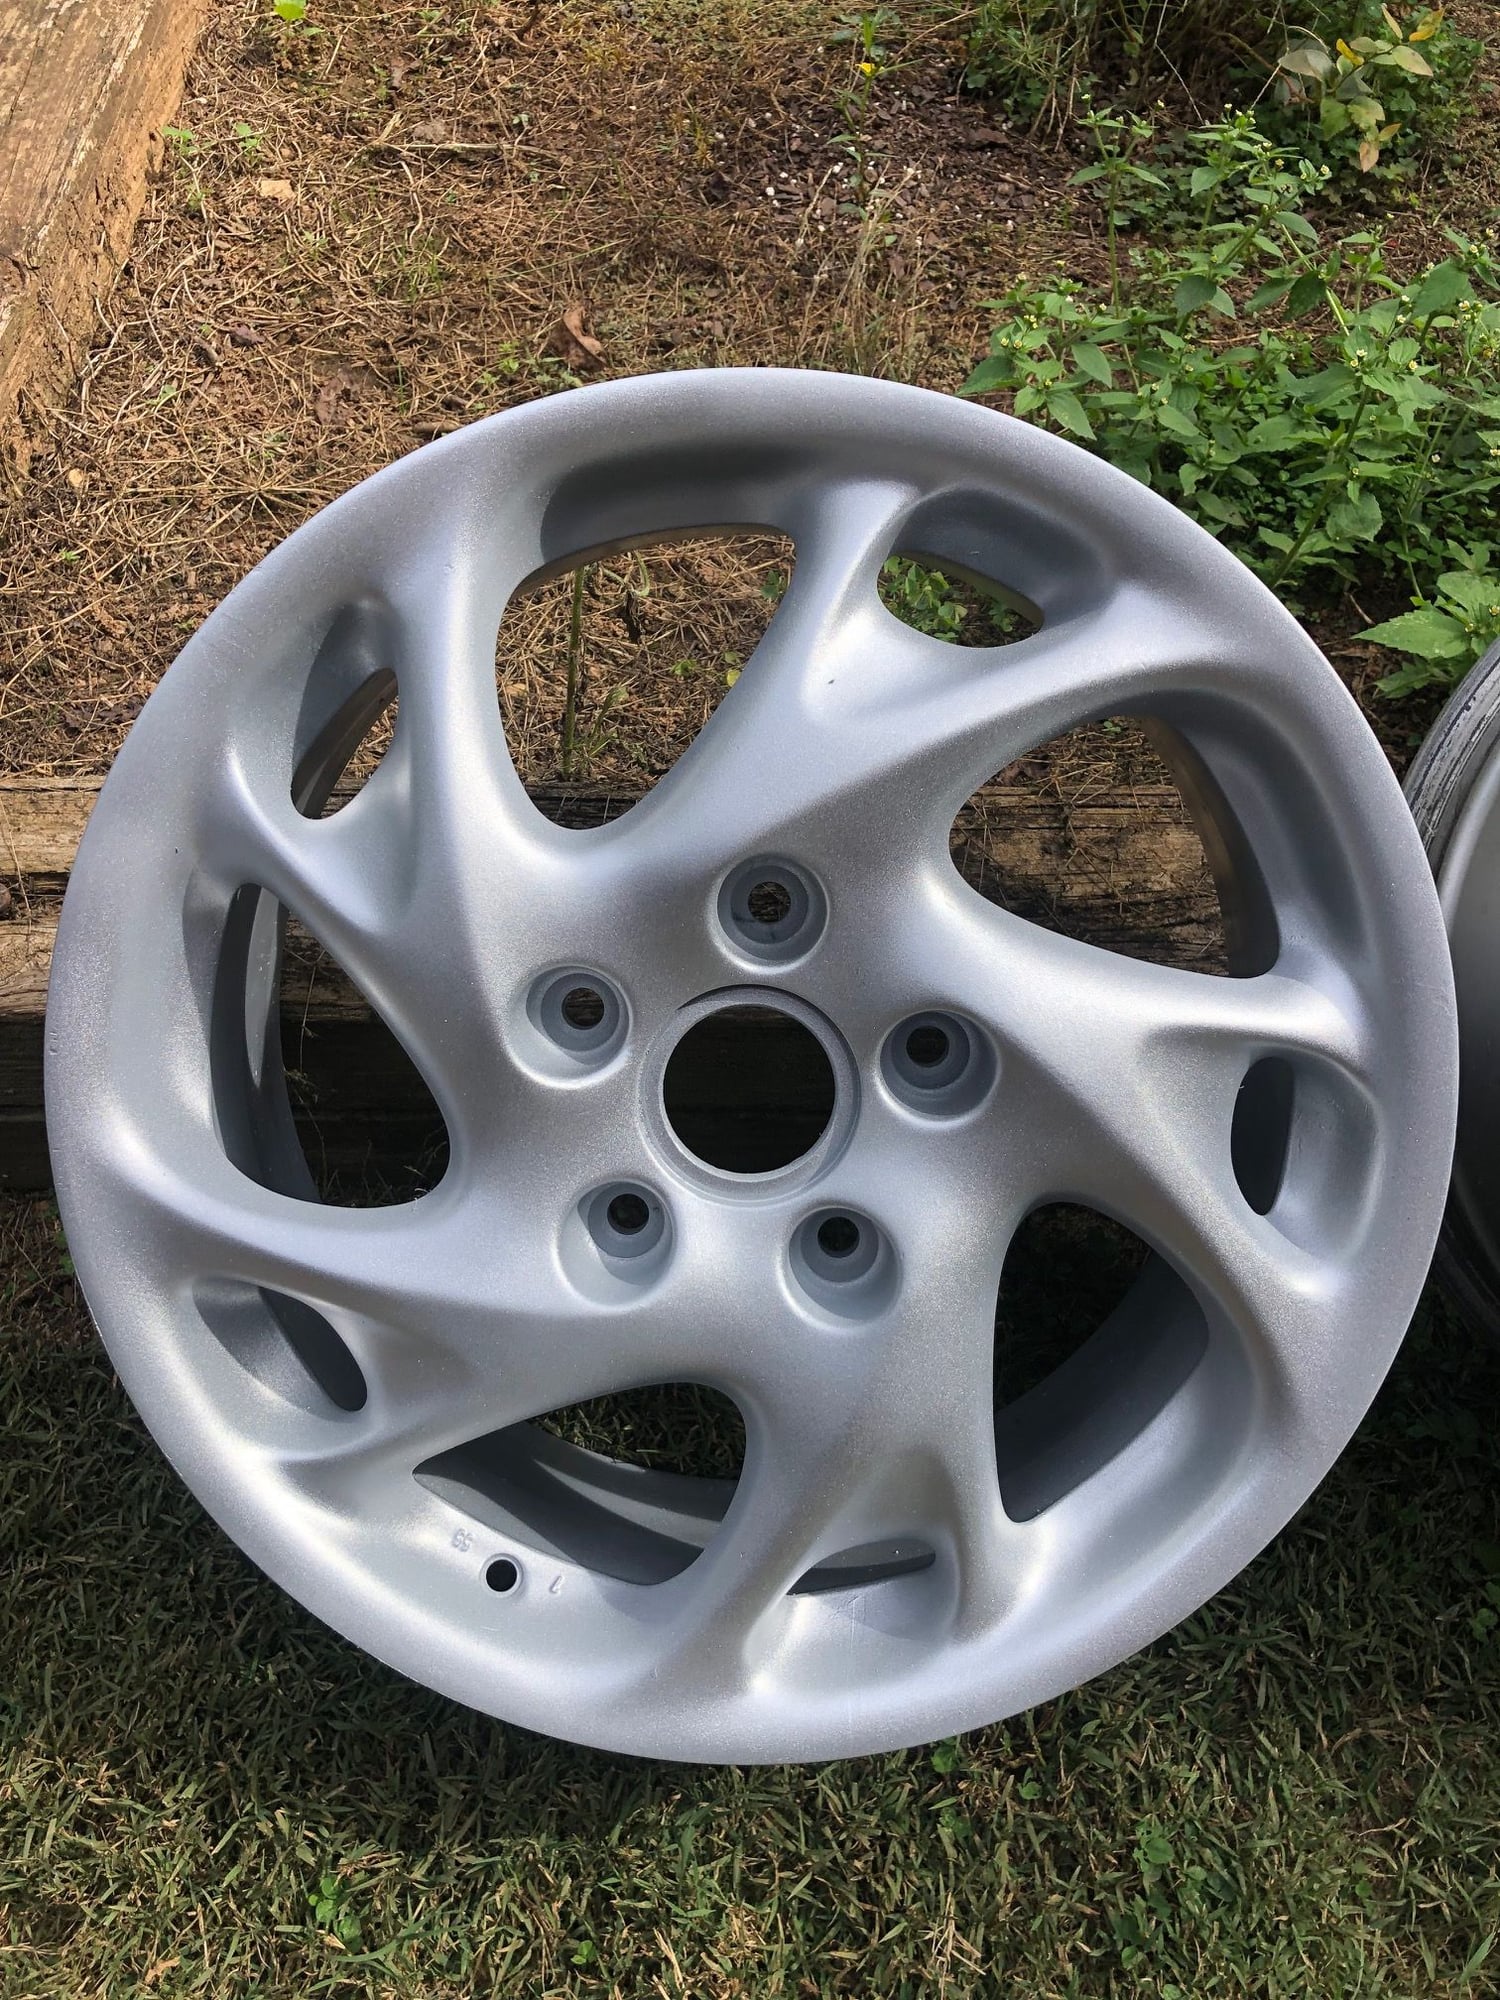 Wheels and Tires/Axles - FS: Rare 986 17" Dyno Wheel Set & 18" Turbo Twist Wheels - Used - 1997 to 2012 Porsche Boxster - Bethania, NC 27010, United States